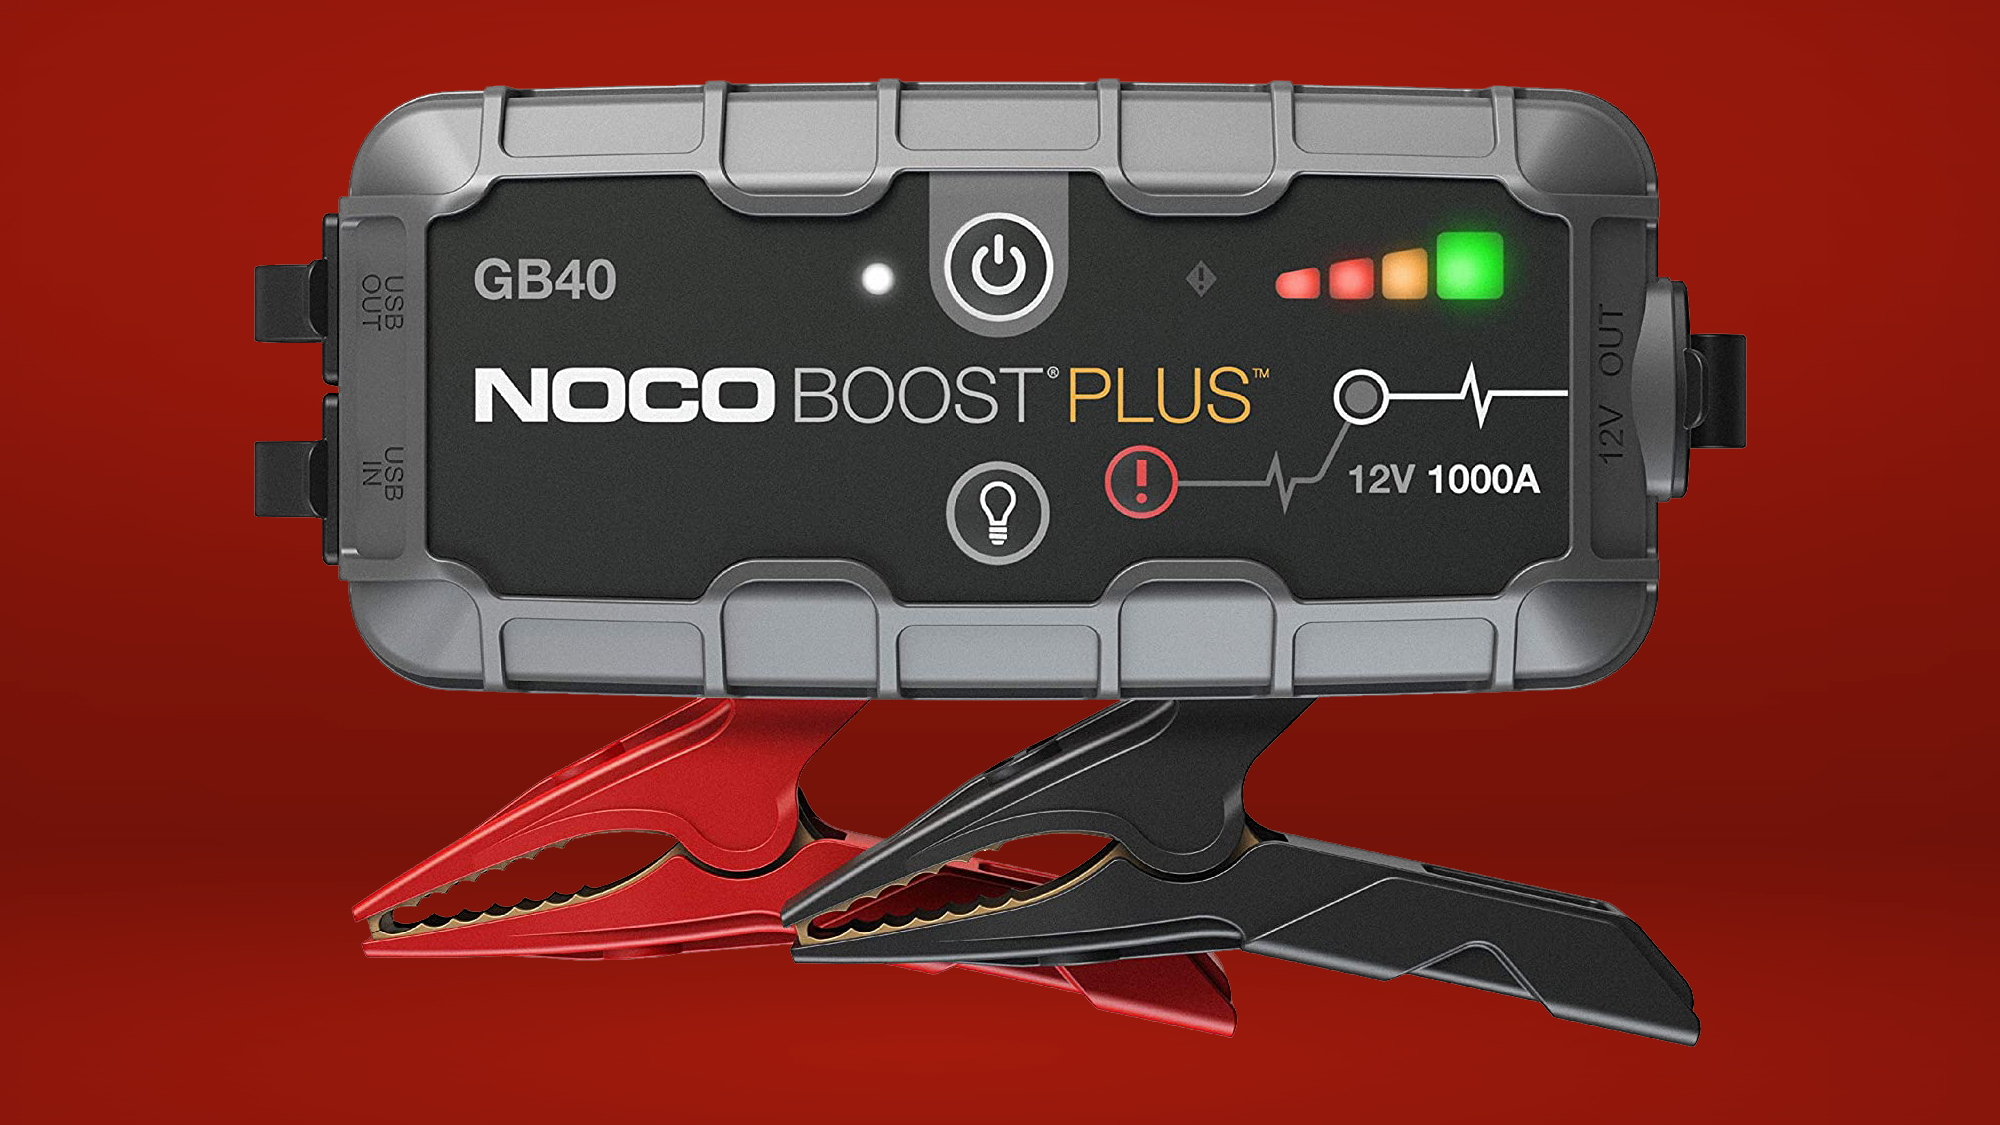 noco boost gb40 jump starter on red background